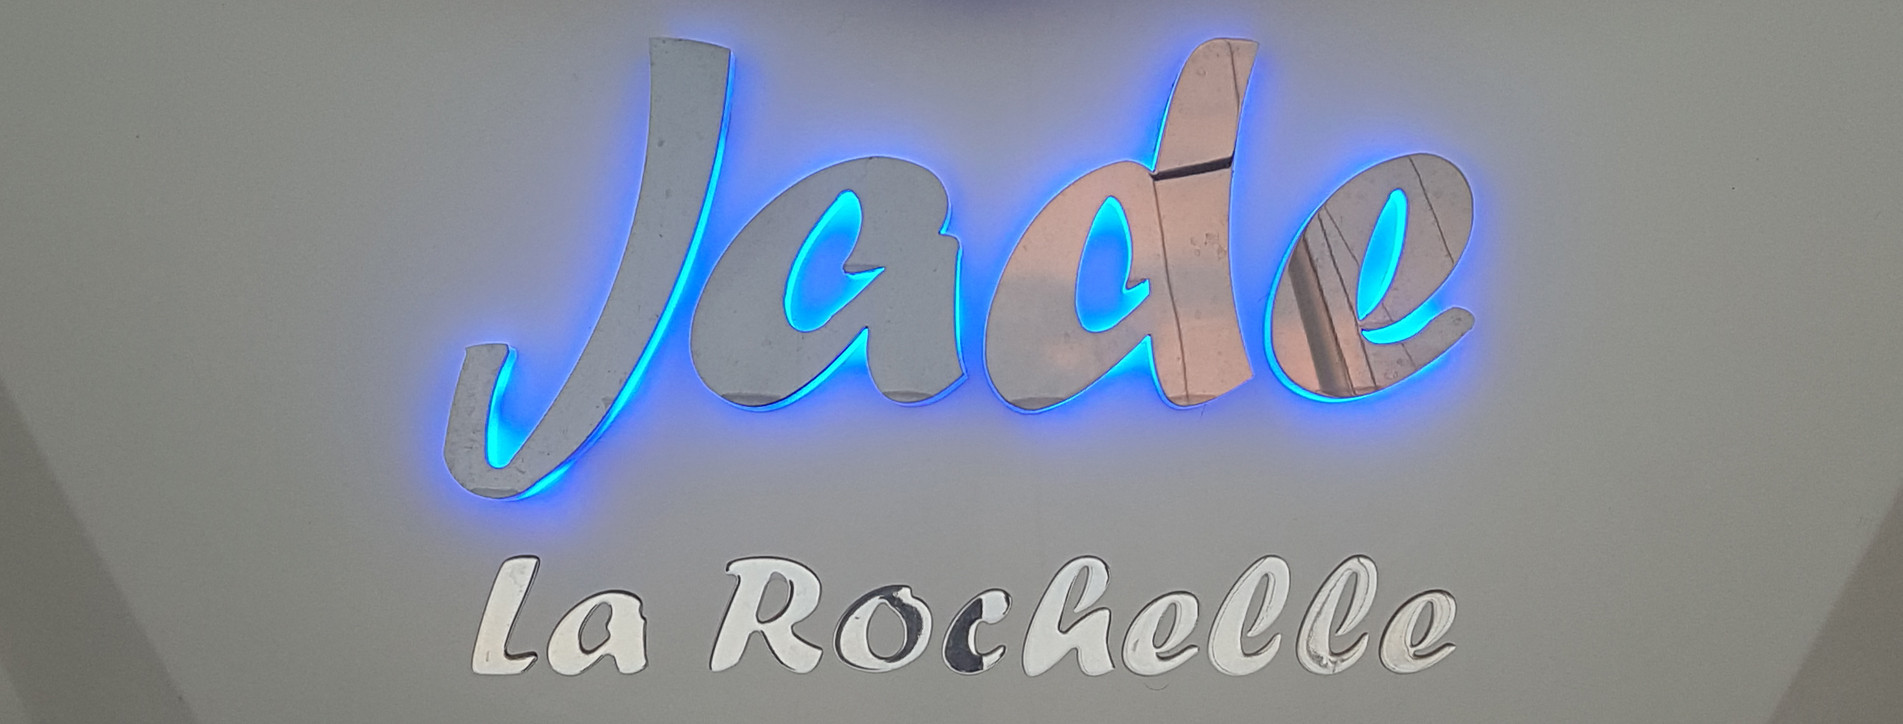 Embossed stainless steel letters with blue LED lighting